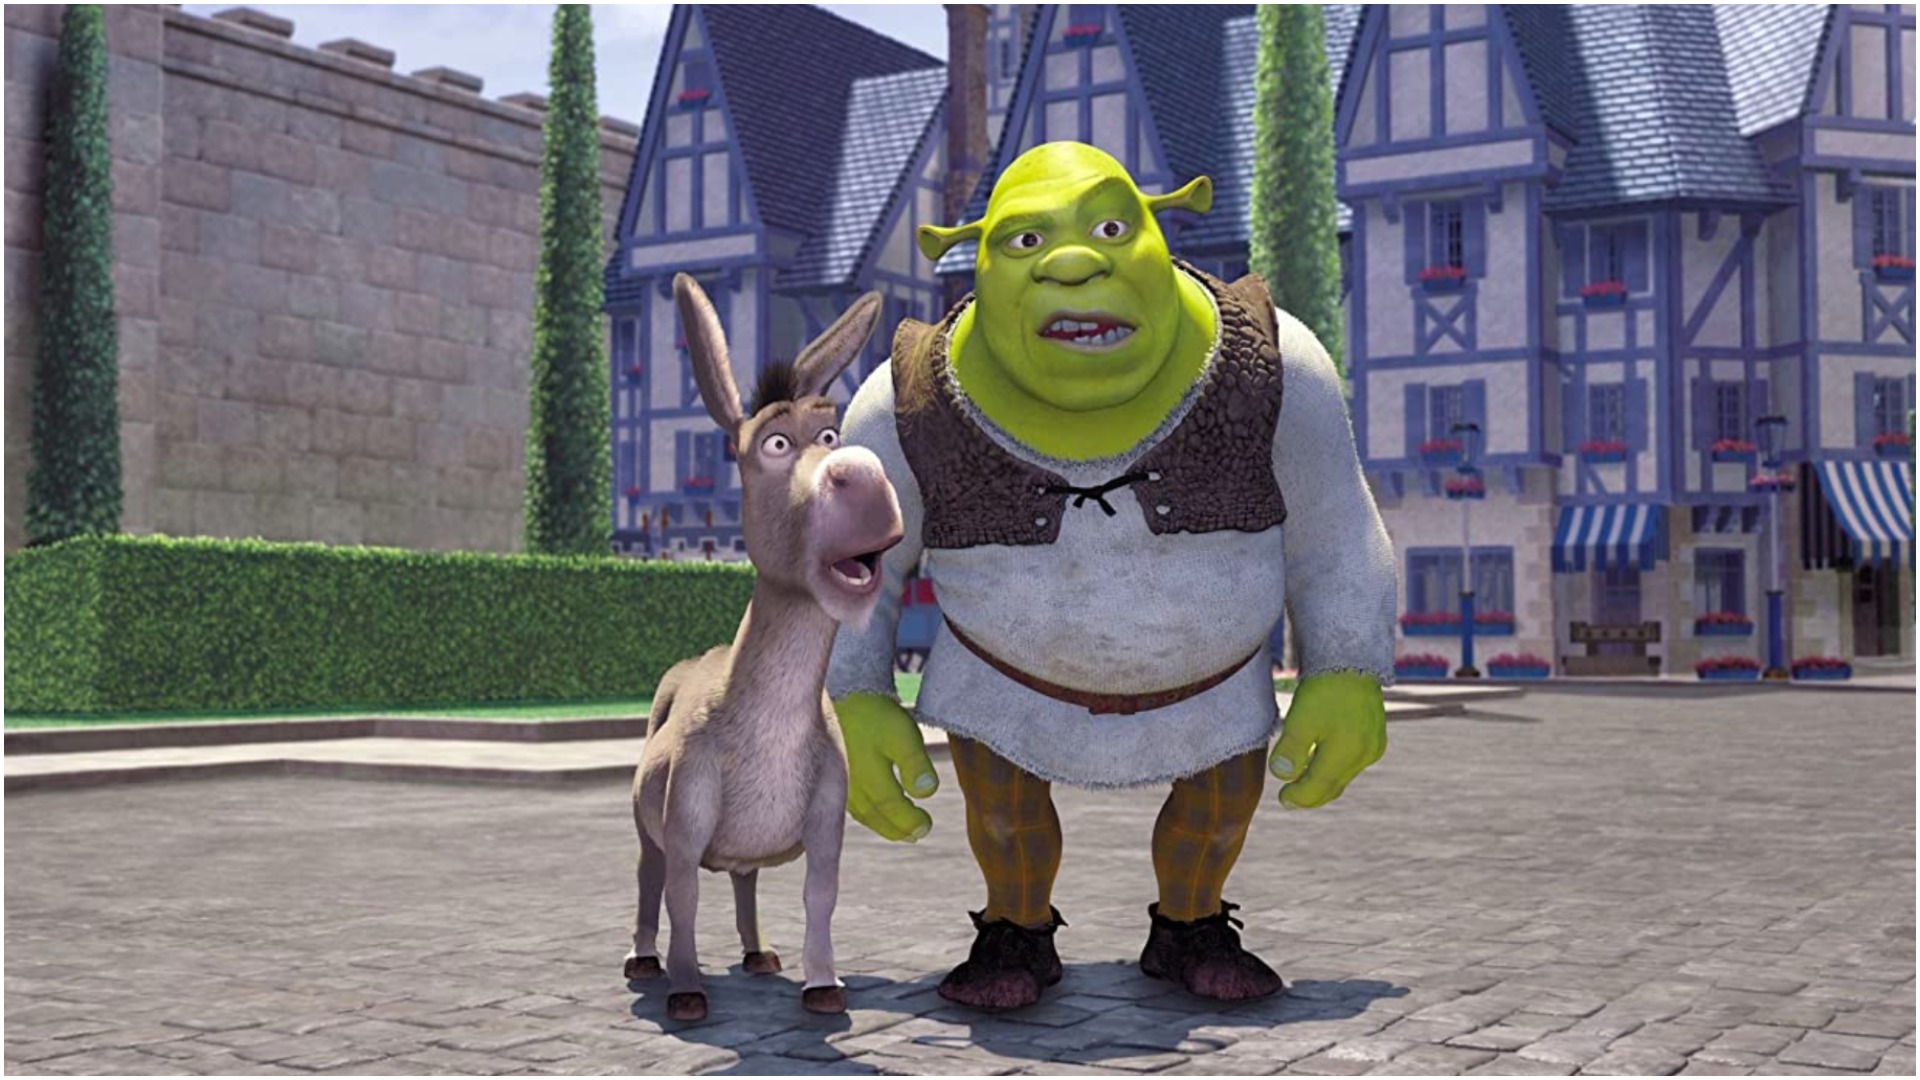 Another Shrek sequel isn’t off the table, says Mike Myers